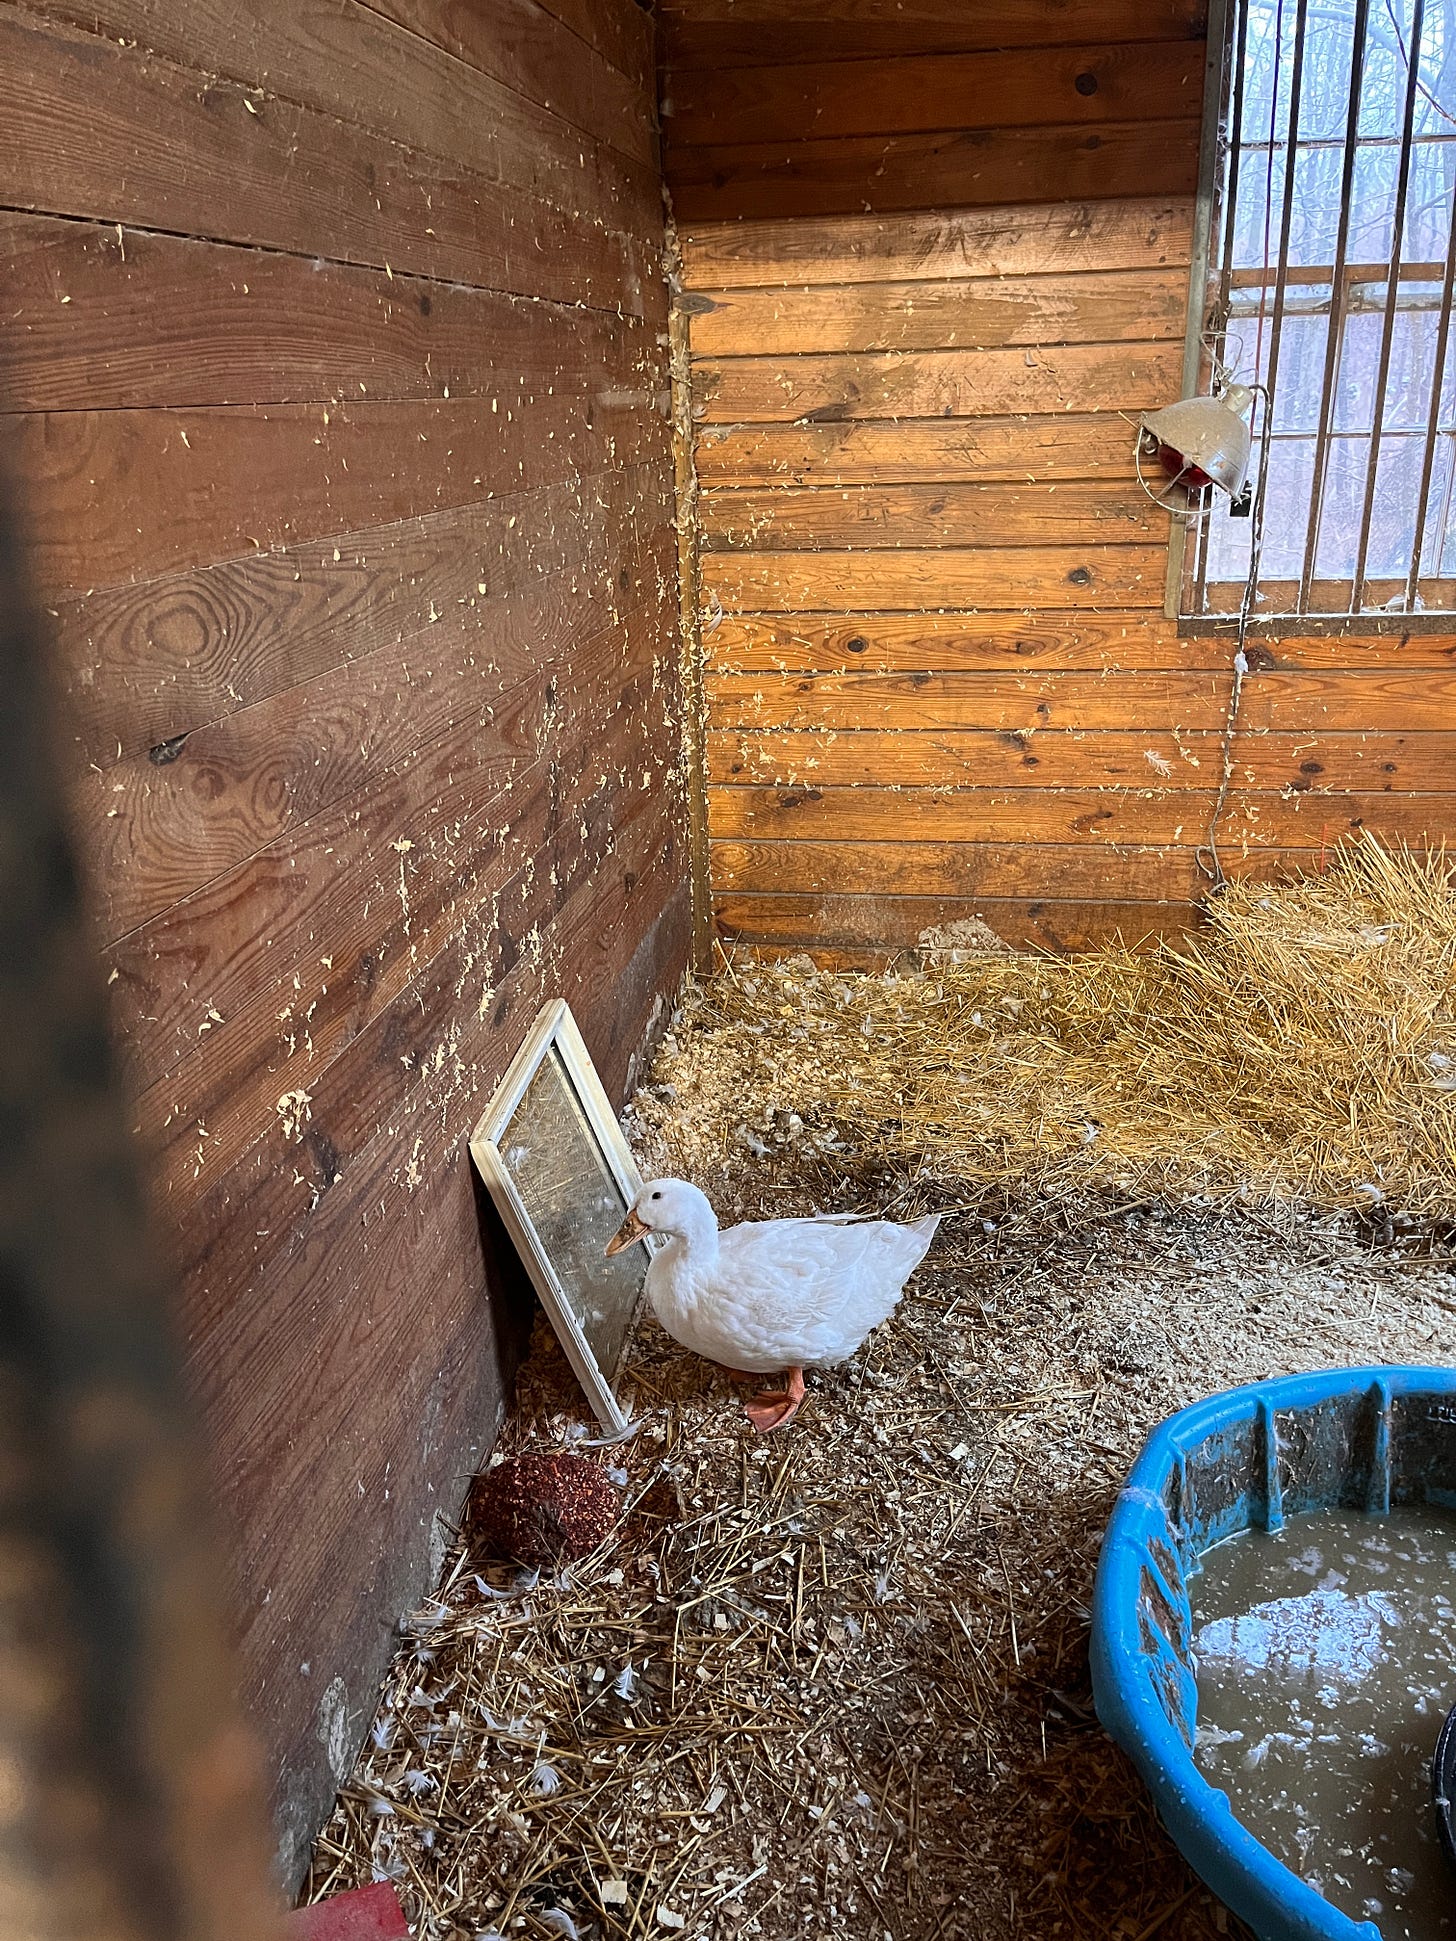 A white duck staring into a mirror, in a pen in a barn, with bedding materials stuck to the walls and a hay bale and a blue kiddie pool nearby.